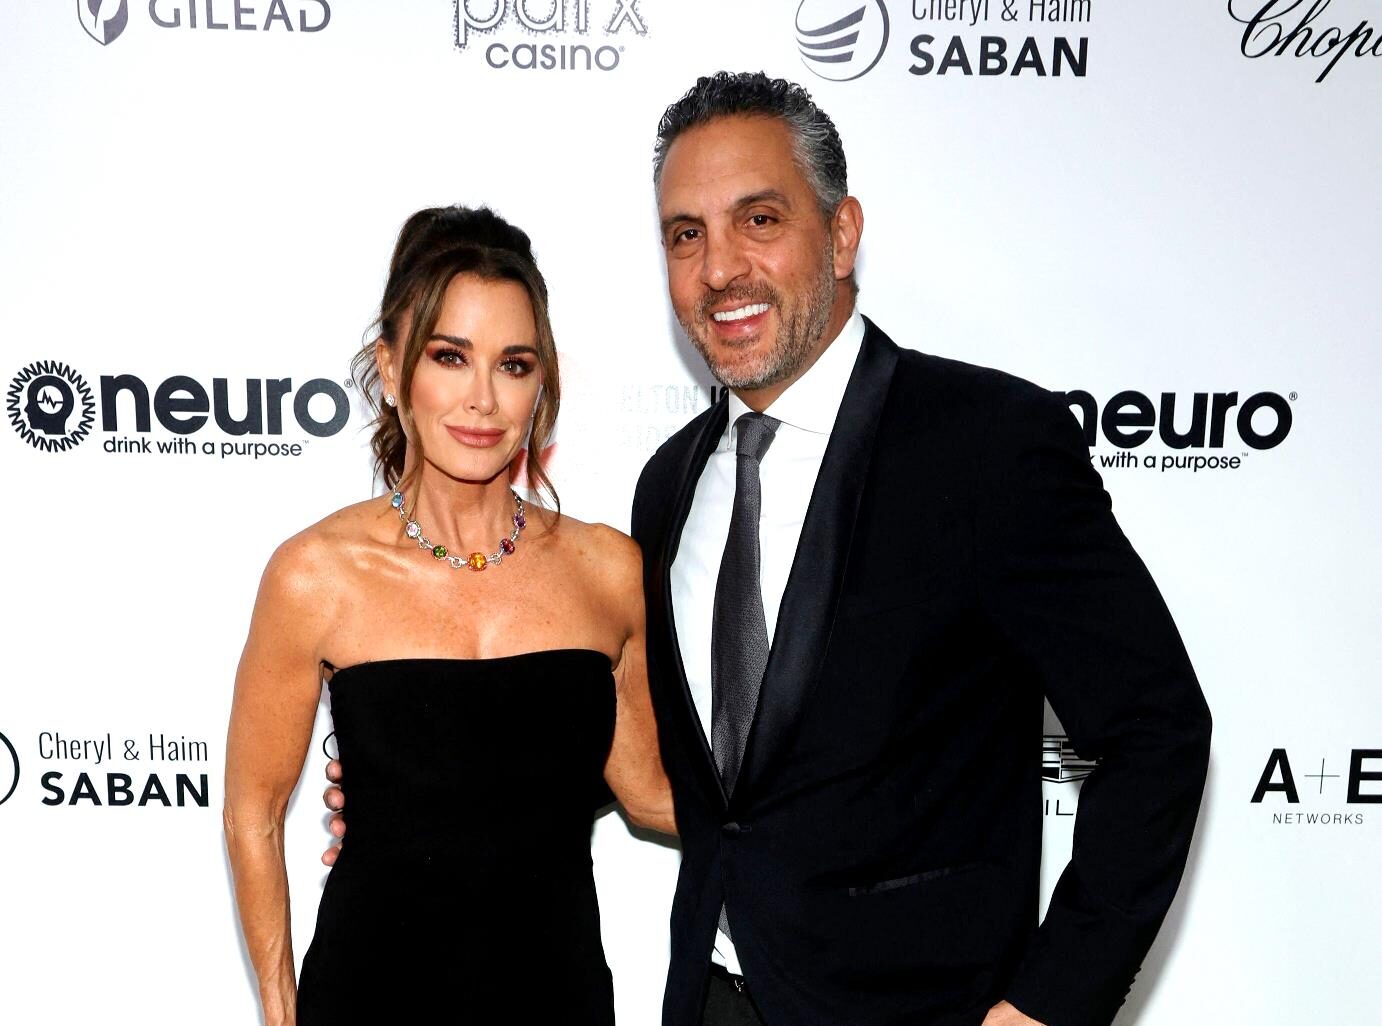 Mauricio Umansky Says He and Kyle Are "Happy," "Working Through" Separation as She Reacts to DWTS Announcement and Films With Morgan in Paris